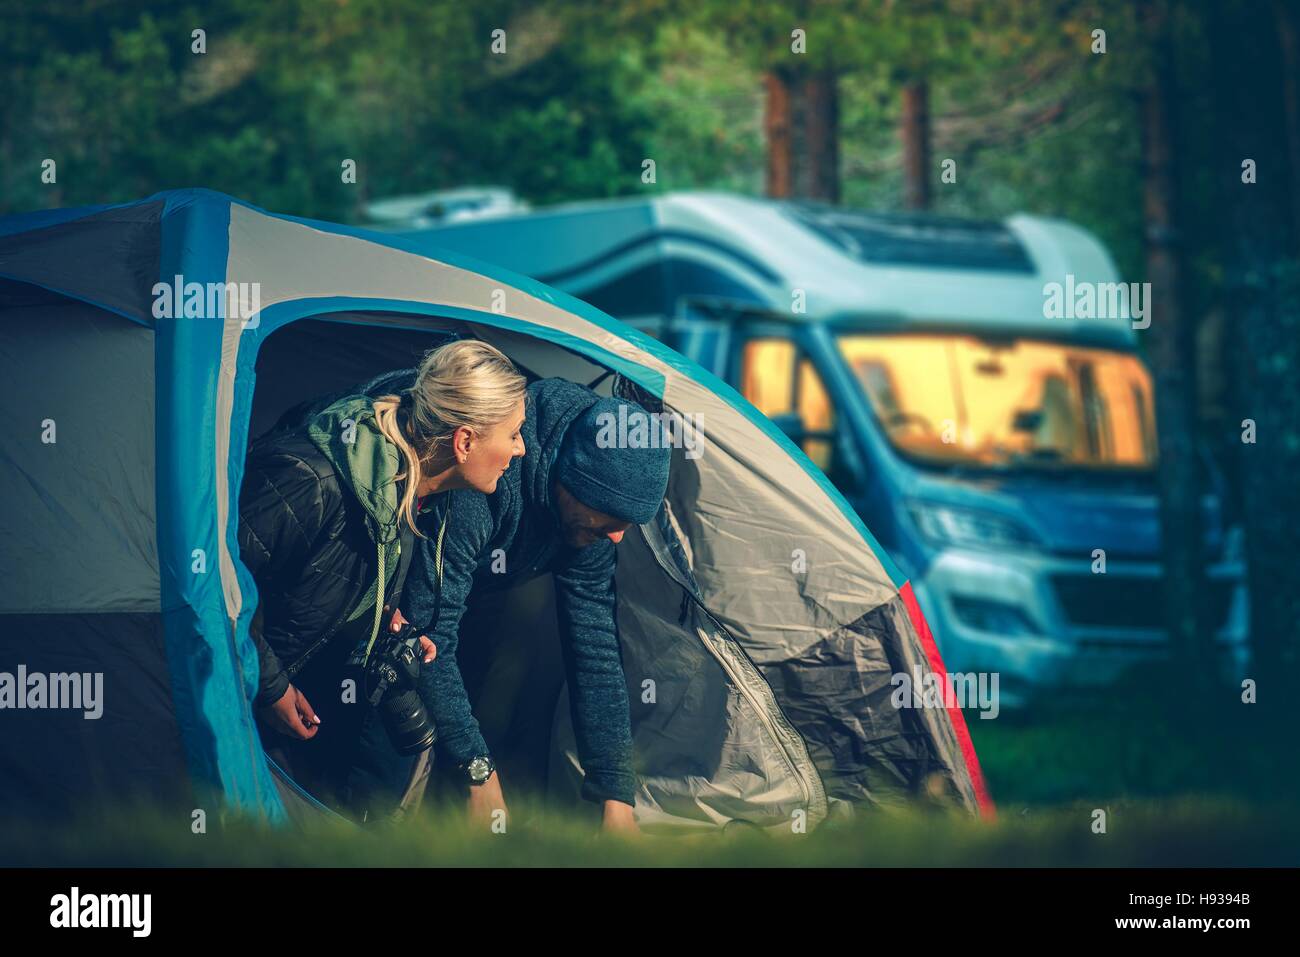 Couples Tent Camping. Men and Woman in Their 30s Camping in the Small Tent with Motorhome in the Background. Stock Photo